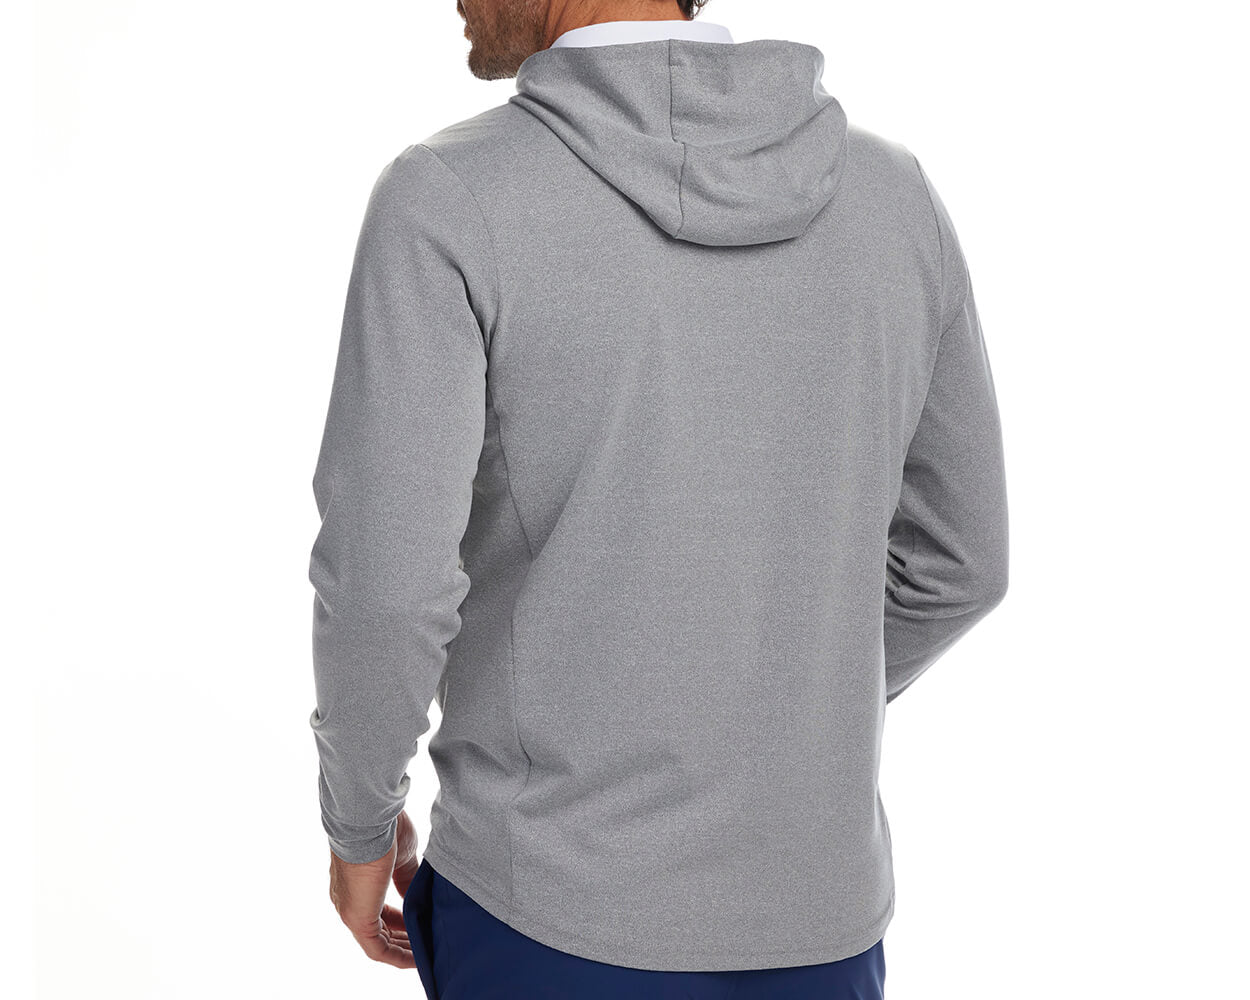 Back shot of Holderness and Bourne gray pull over hoodie modeled on man's torso.